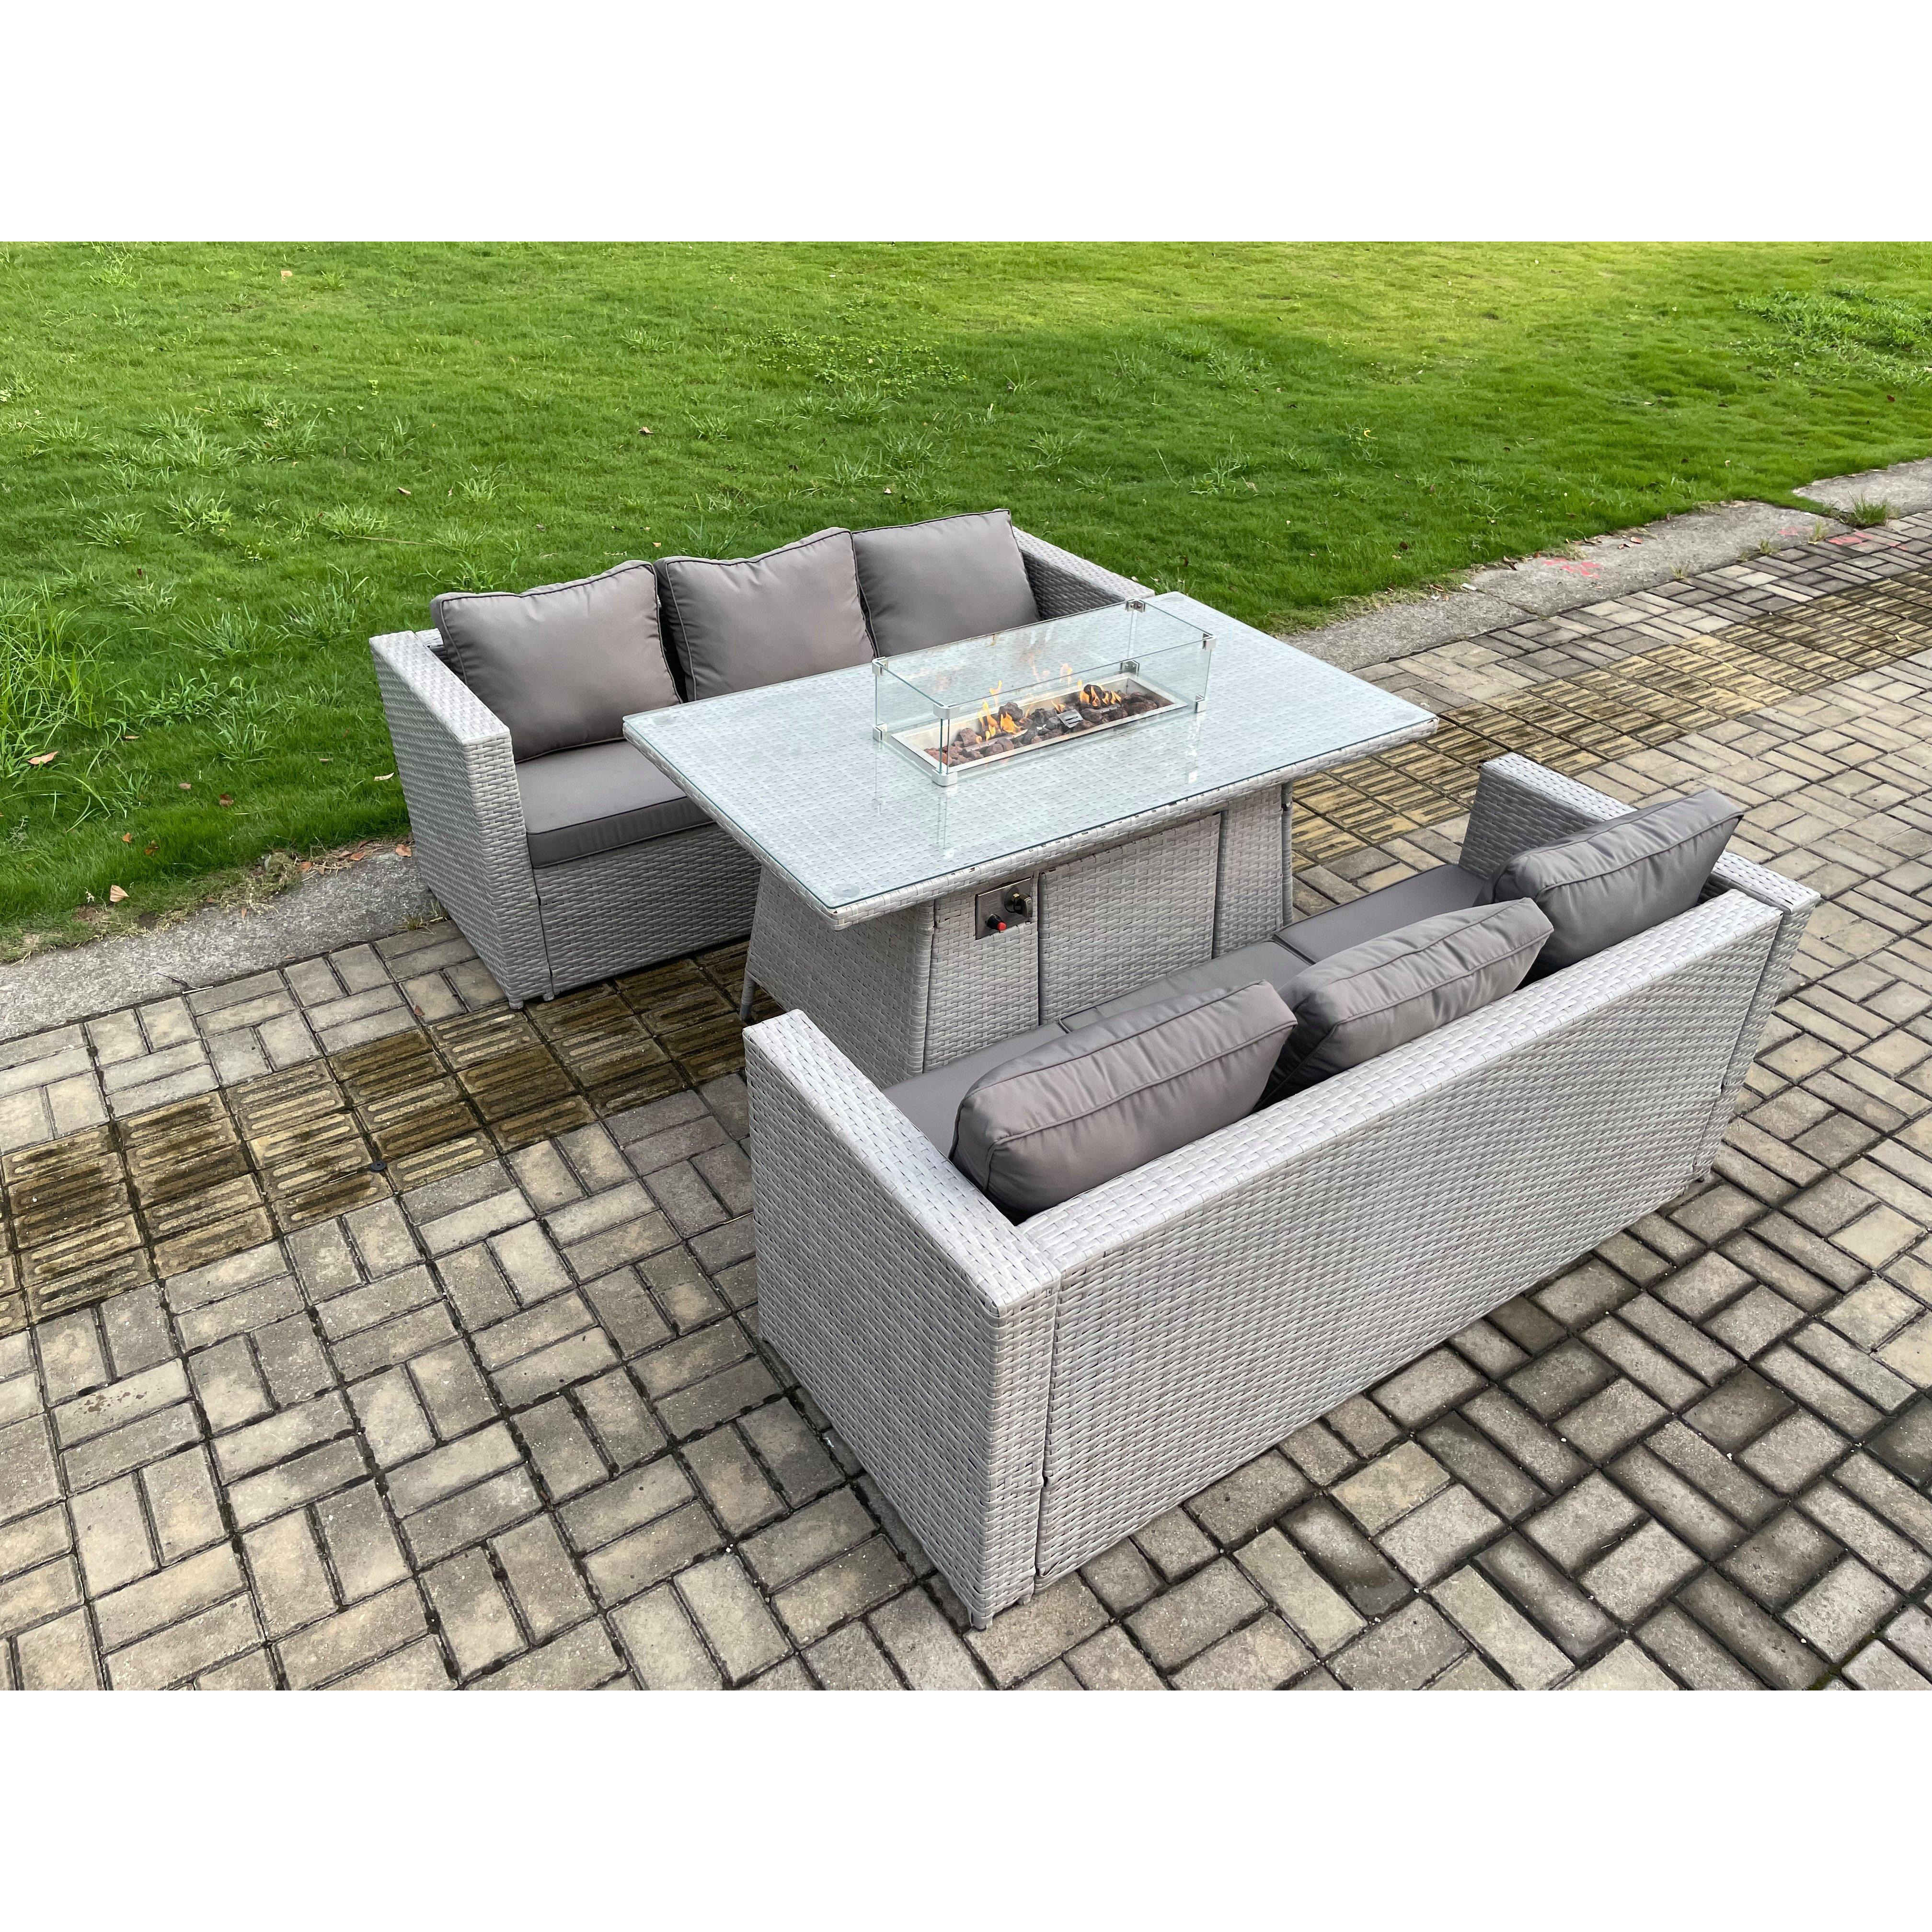 Outdoor Garden Dining Sets Rattan Furniture Gas Fire Pit Dining Table Gas Heater Light Grey - image 1